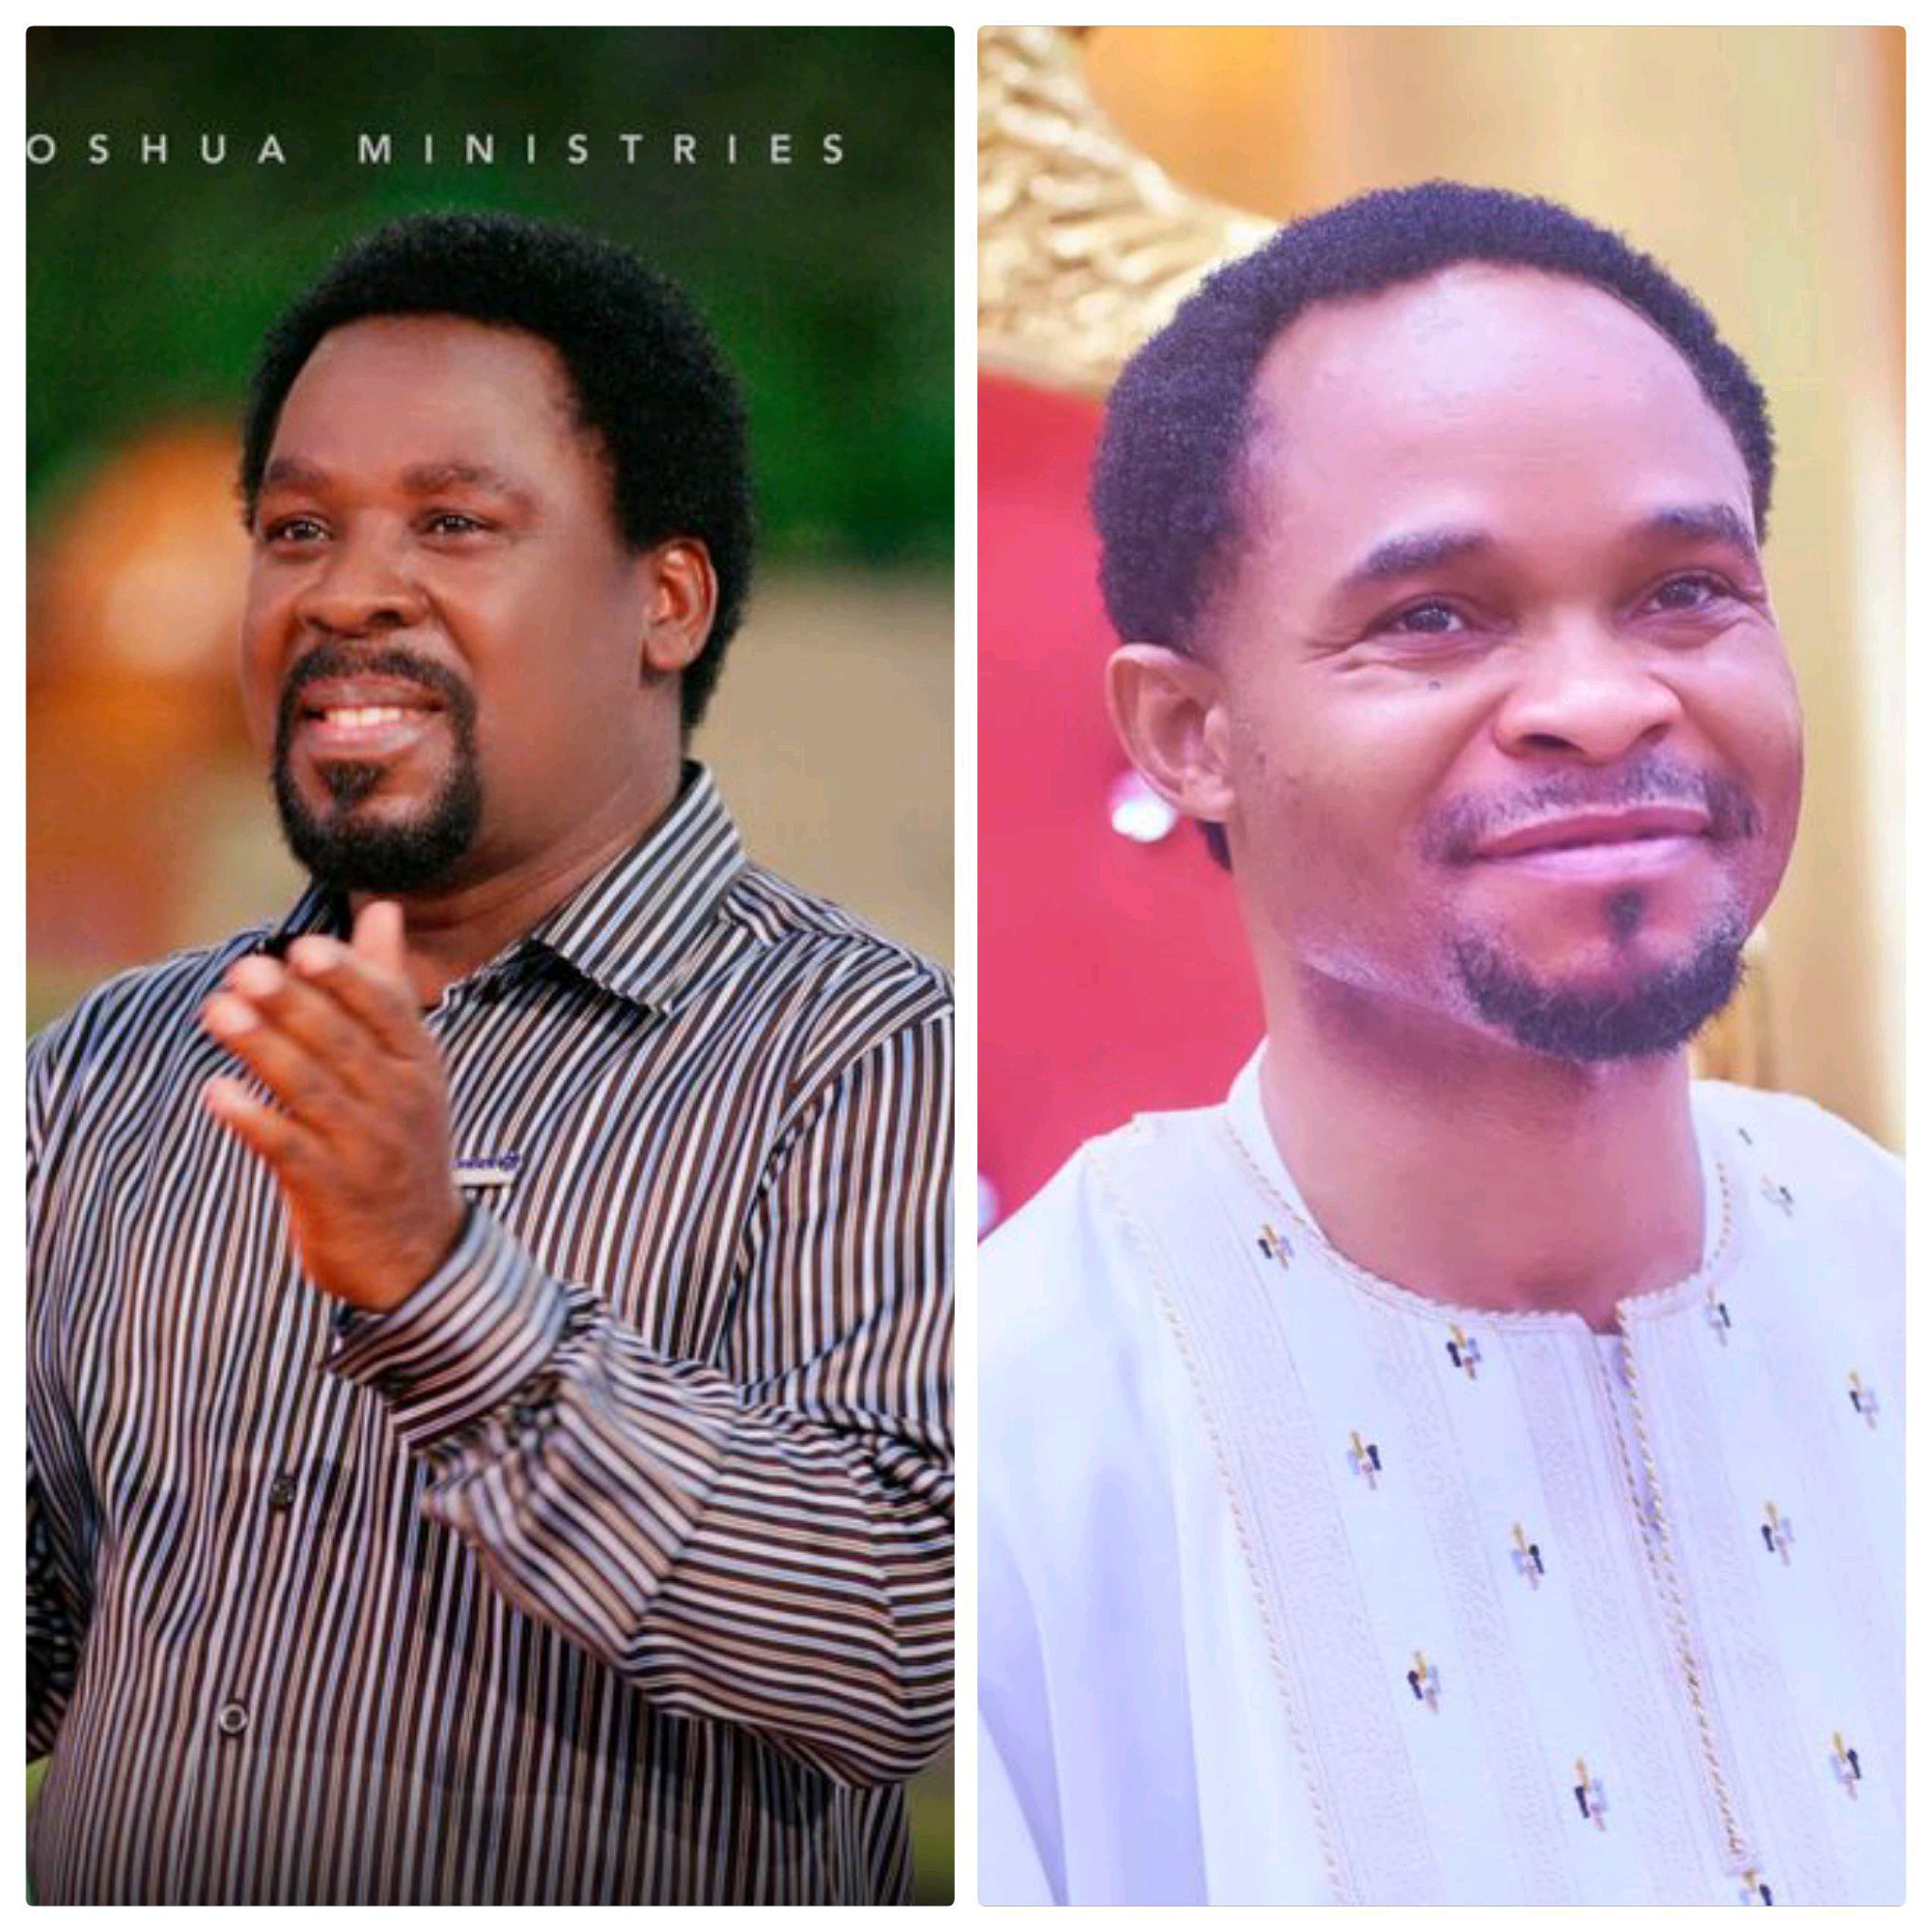 Odumeje stated. "After the late General T.B Joshua, I'm the next most powerful figure globally"